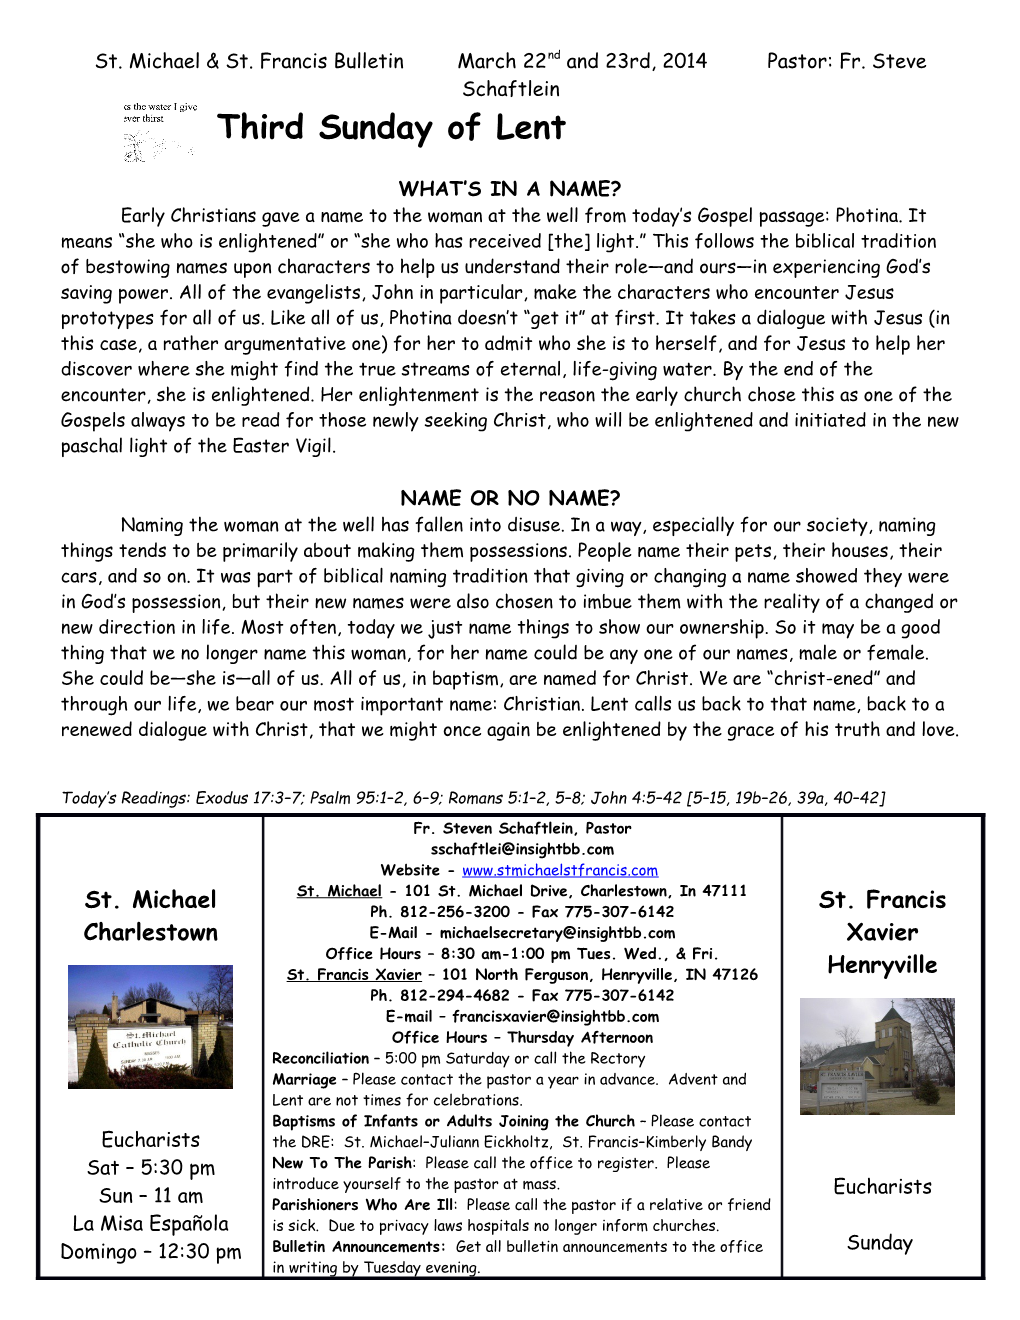 St. Michael & St. Francis Bulletin March 22Nd and 23Rd, 2014 Pastor: Fr. Steve Schaftlein